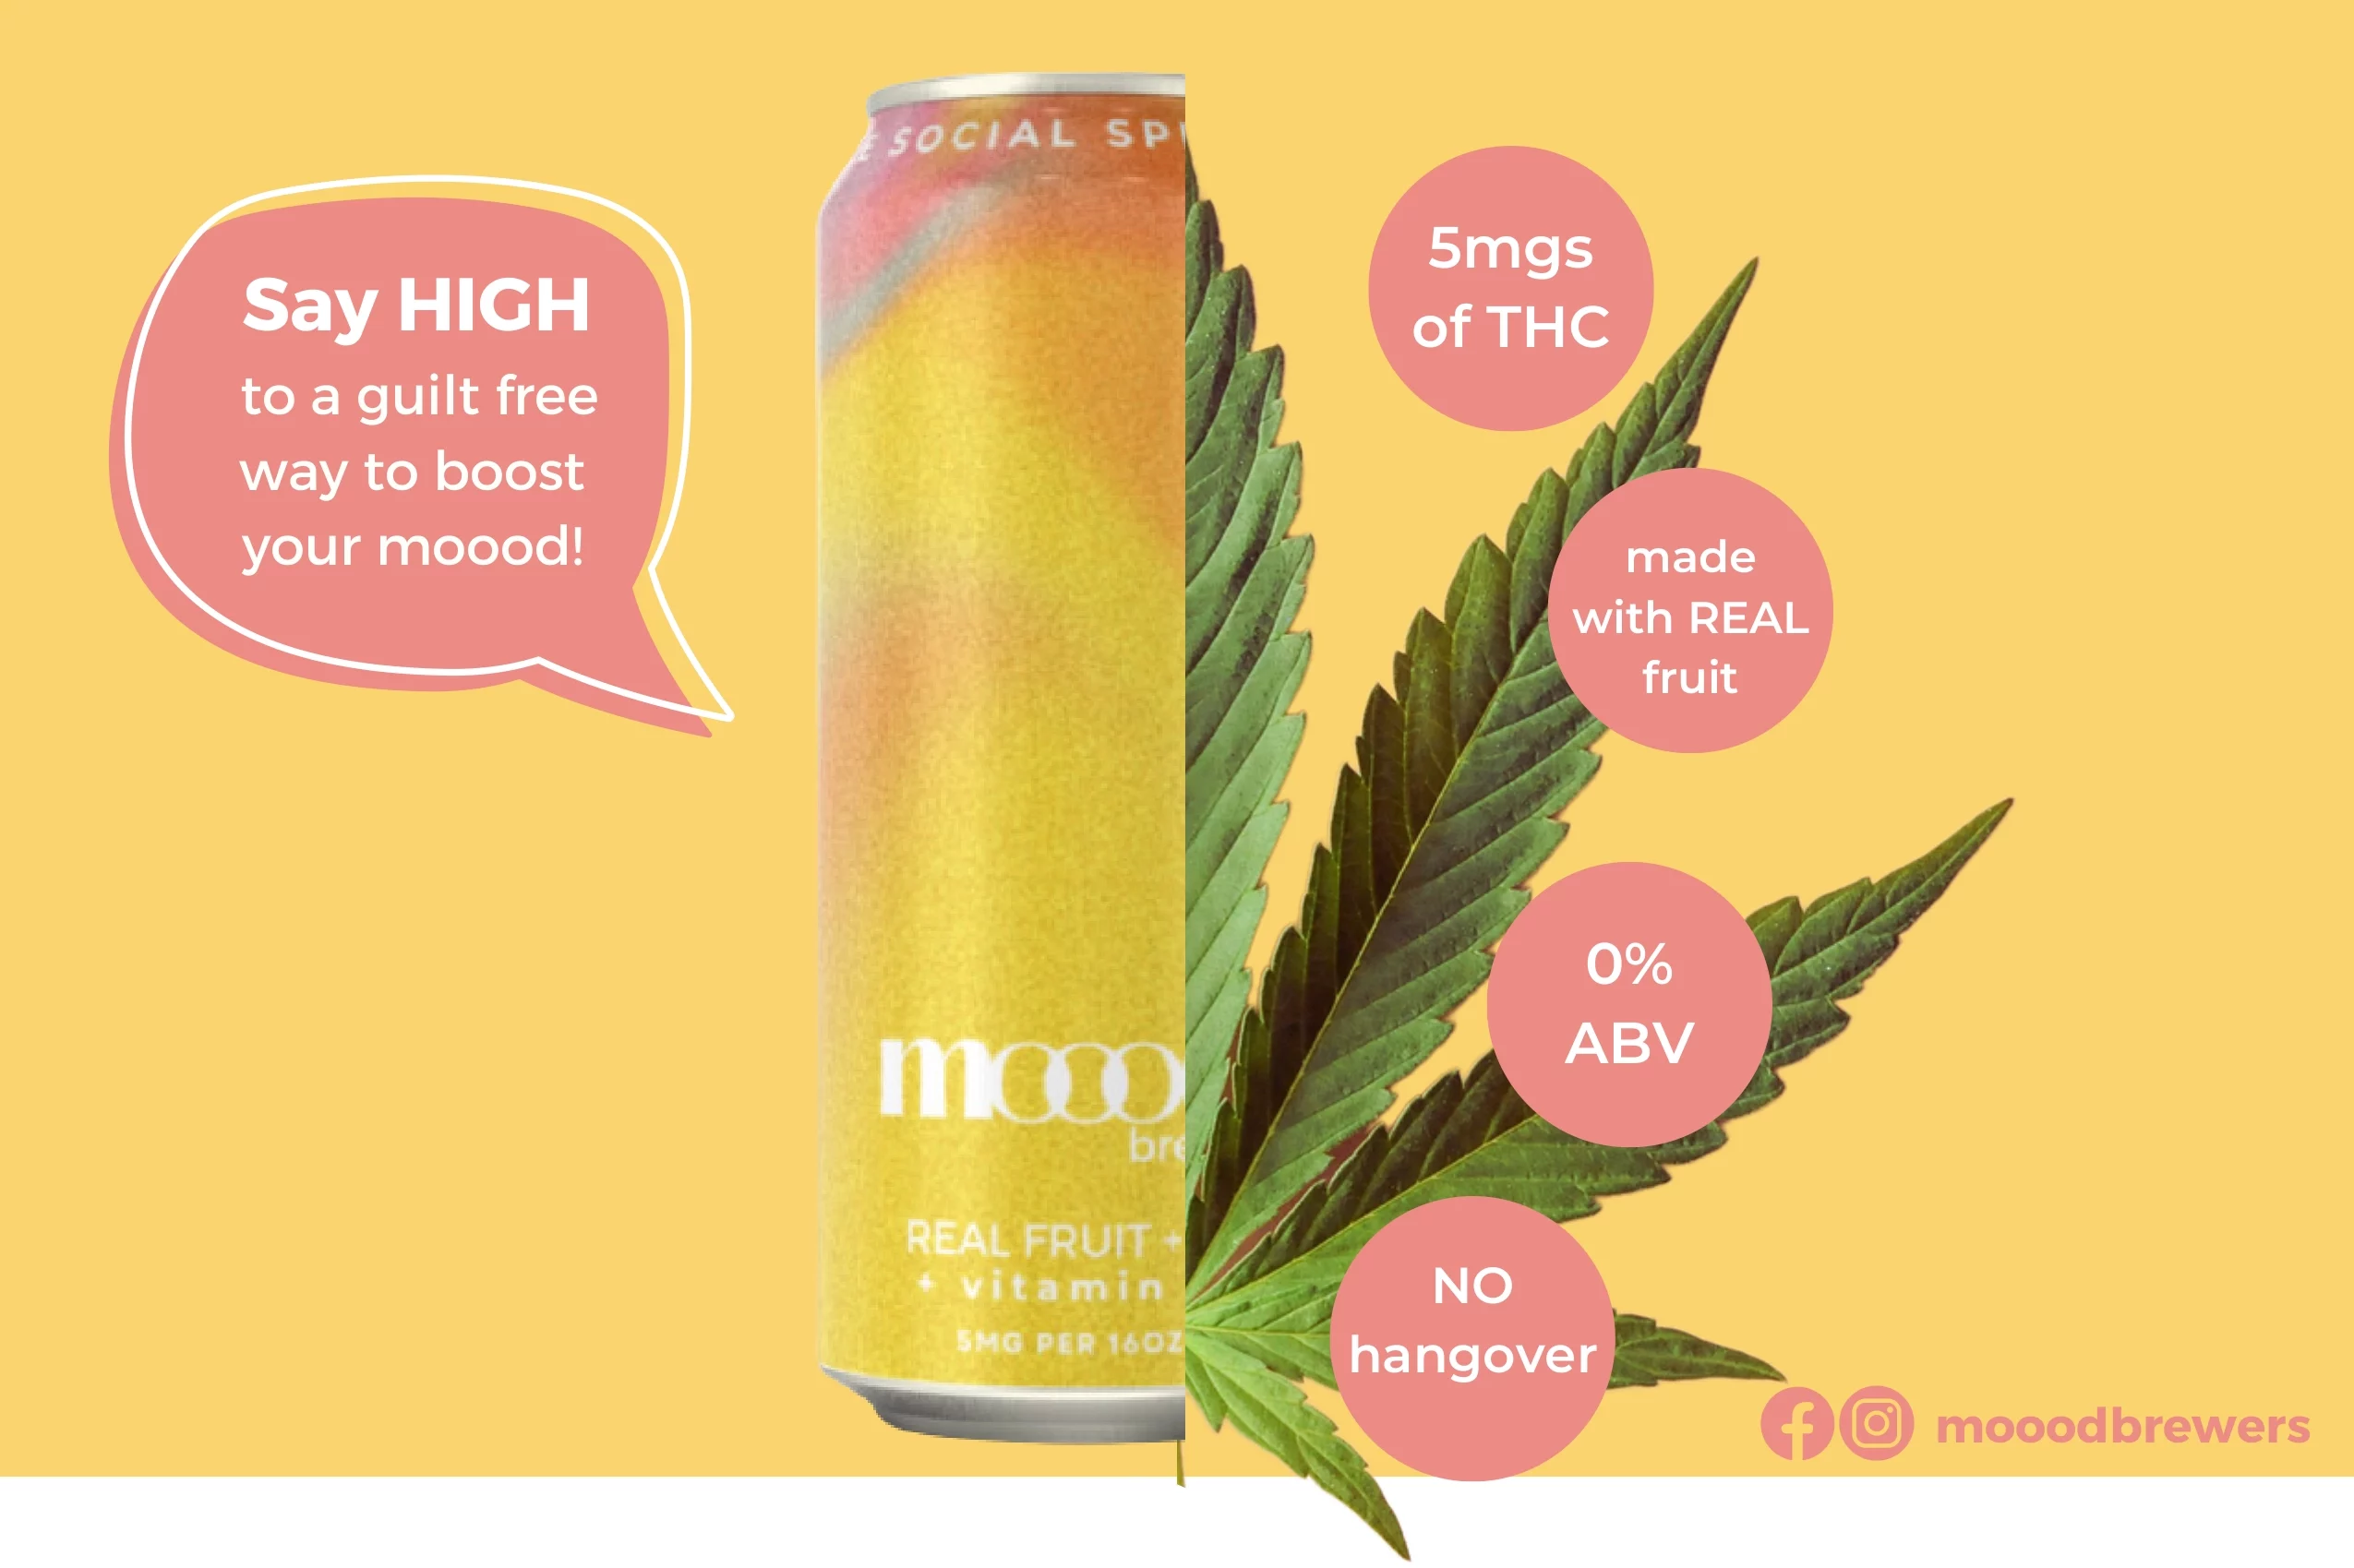 Mood Brews infographic that says "Say High to a guilt free way to boost your mood!" 

5mg of THC
Made with real fruit
0% ABV
No Hangover